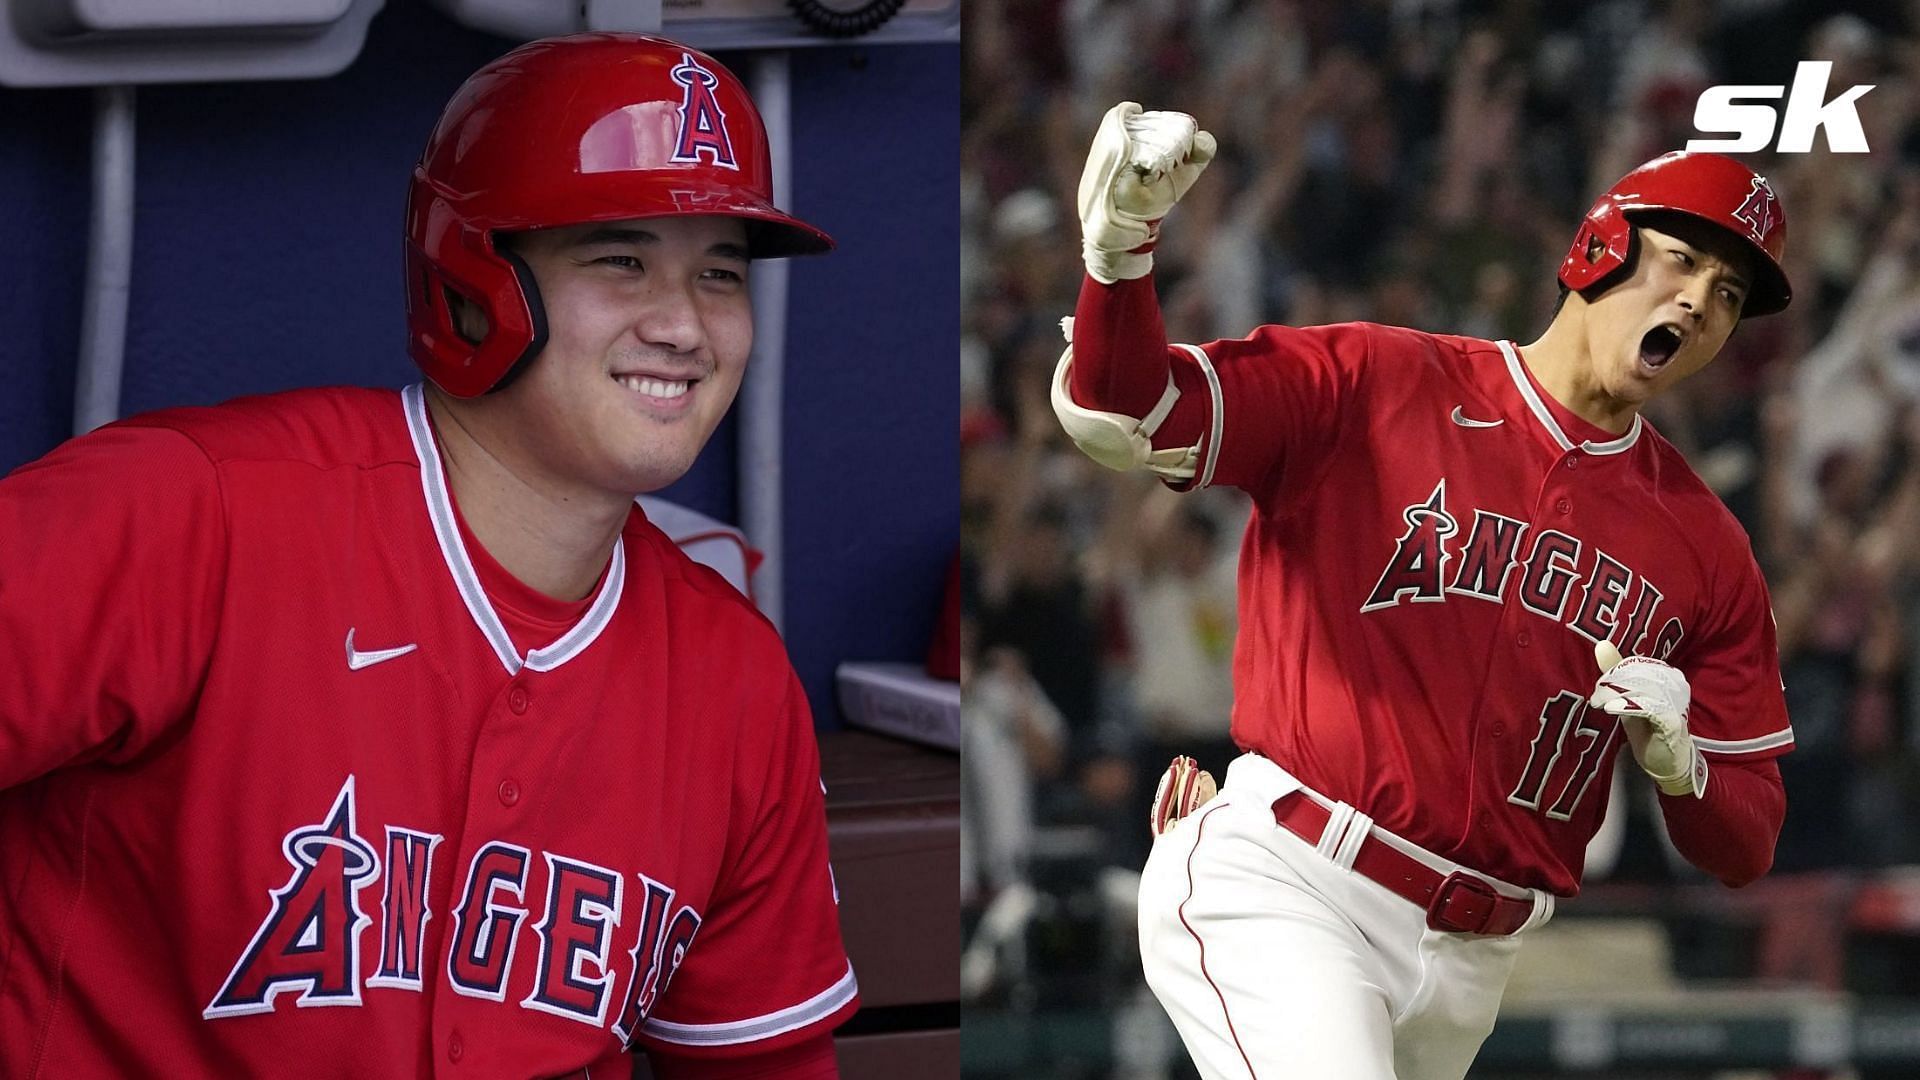 MLB Insider believes Shohei Ohtani could be open to playing in the outfield with his new club